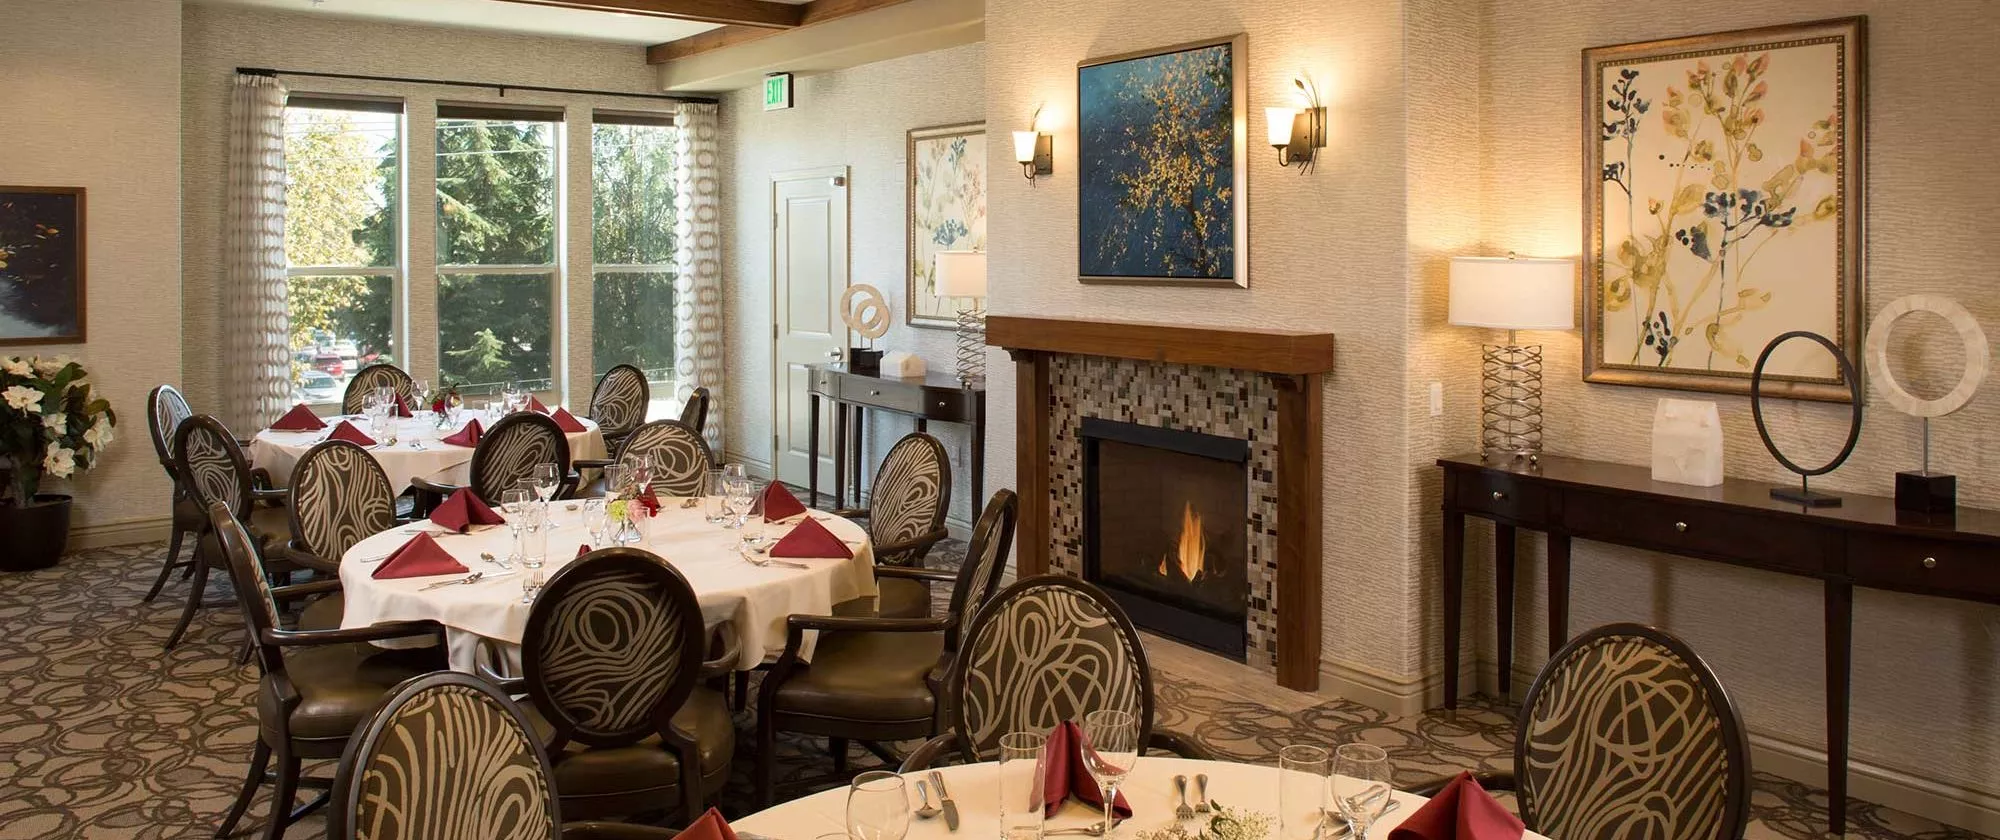 San Jose dining room with fire place